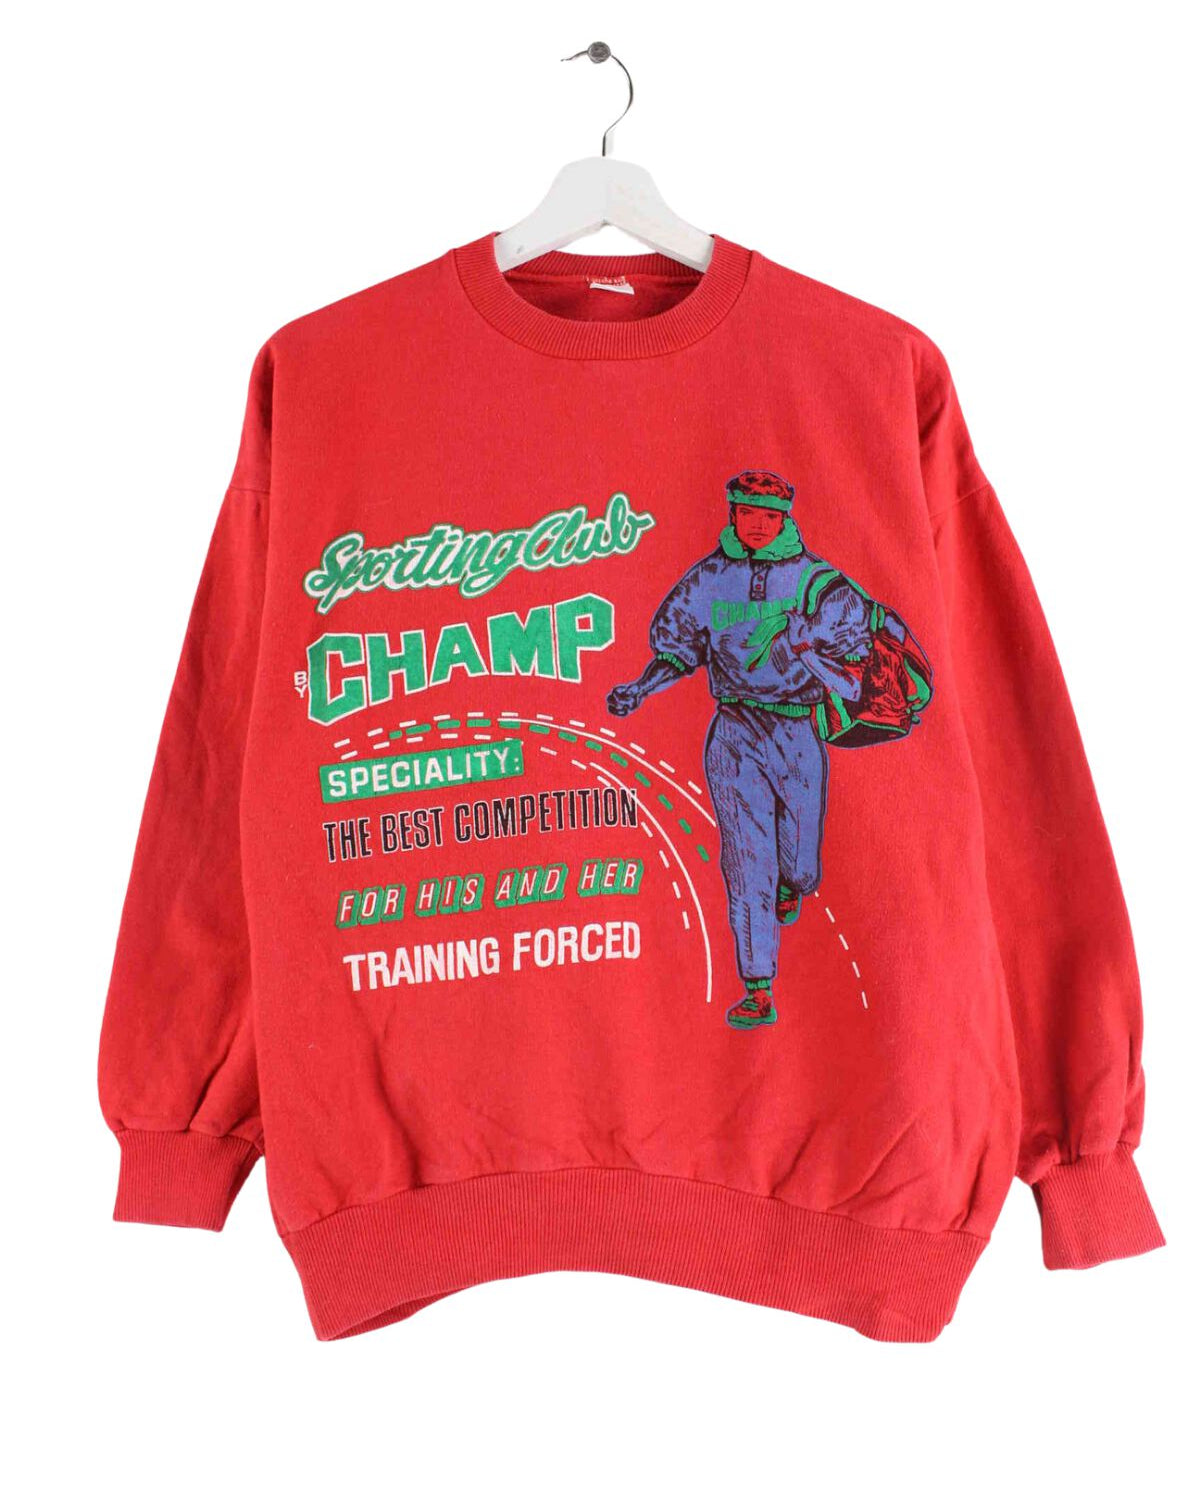 Vintage 80s Champ Print Sweater Rot XS (front image)